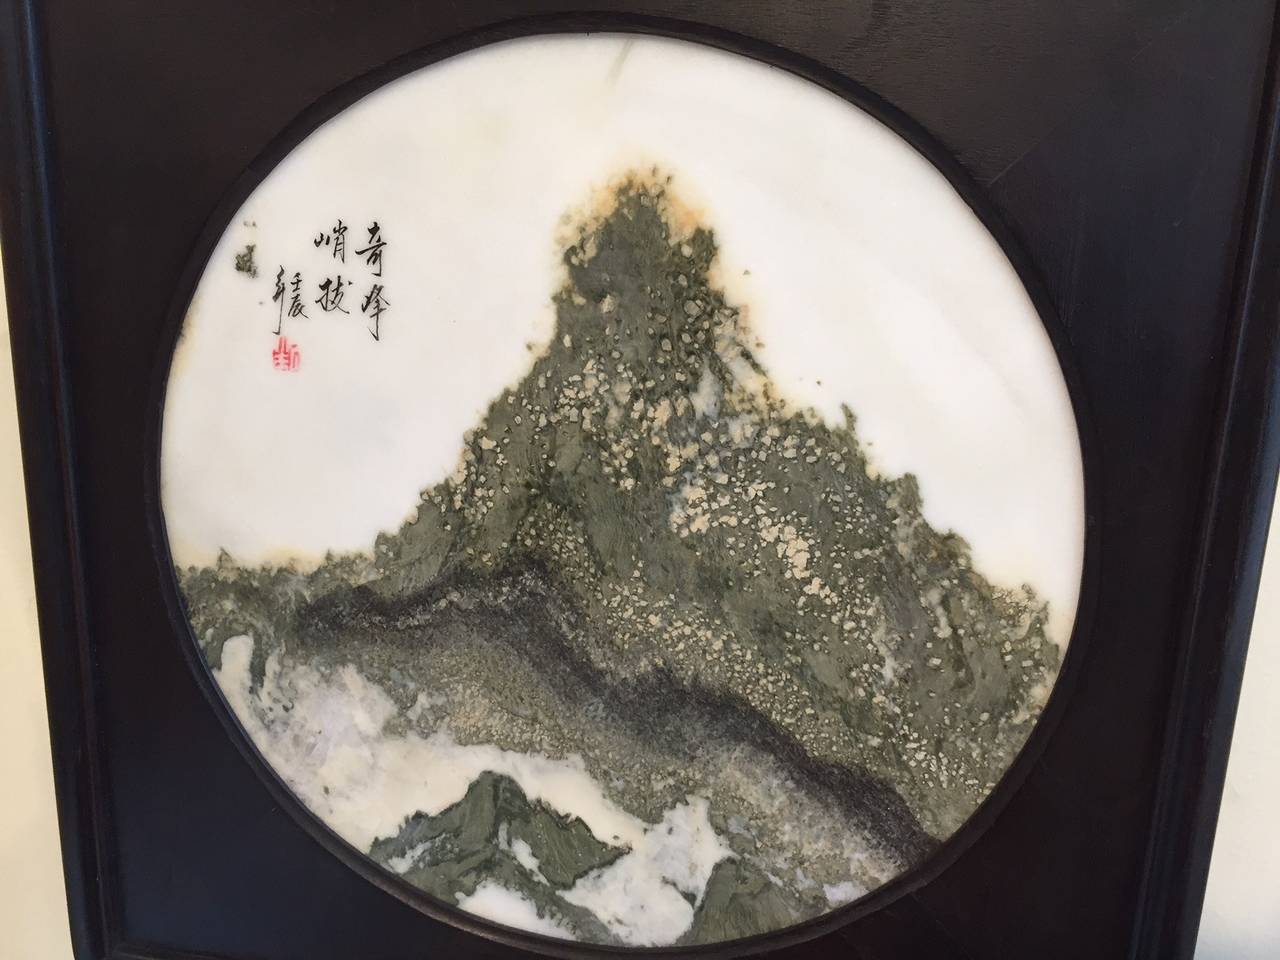 This Chinese extraordinary natural stone painting of a Green Mountain peak, also called a Dream stone, is cut from historic Dali
marble, known for incredible fantastic natural landscapes caused from mineral inclusions, and cut by local Yunnan